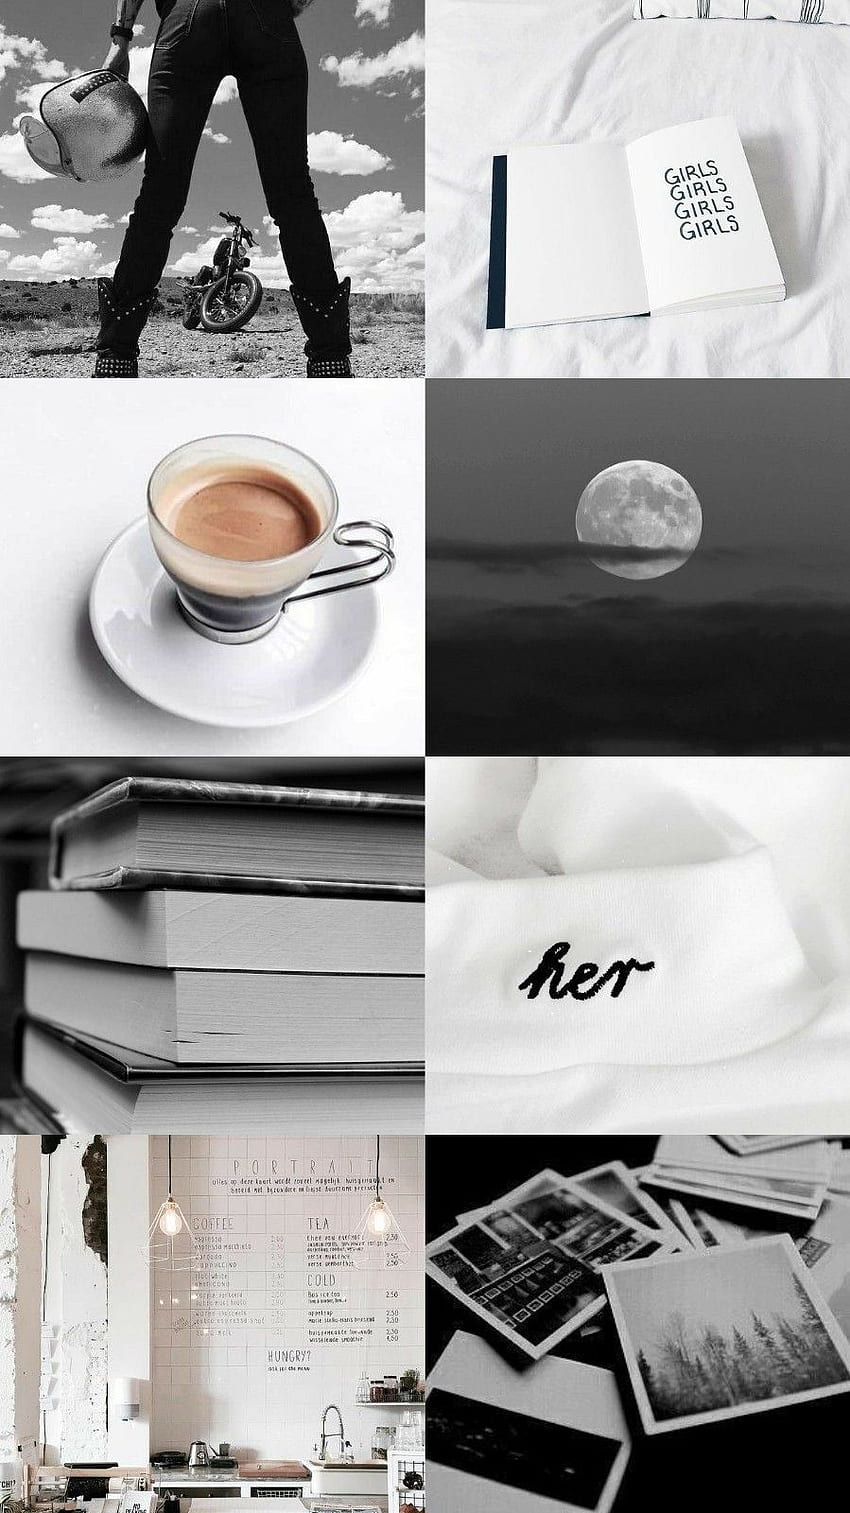 Aesthetic collage of black and white photos including a person standing on a motorcycle, a coffee cup, a book, a moon, and a beanie. - Coffee